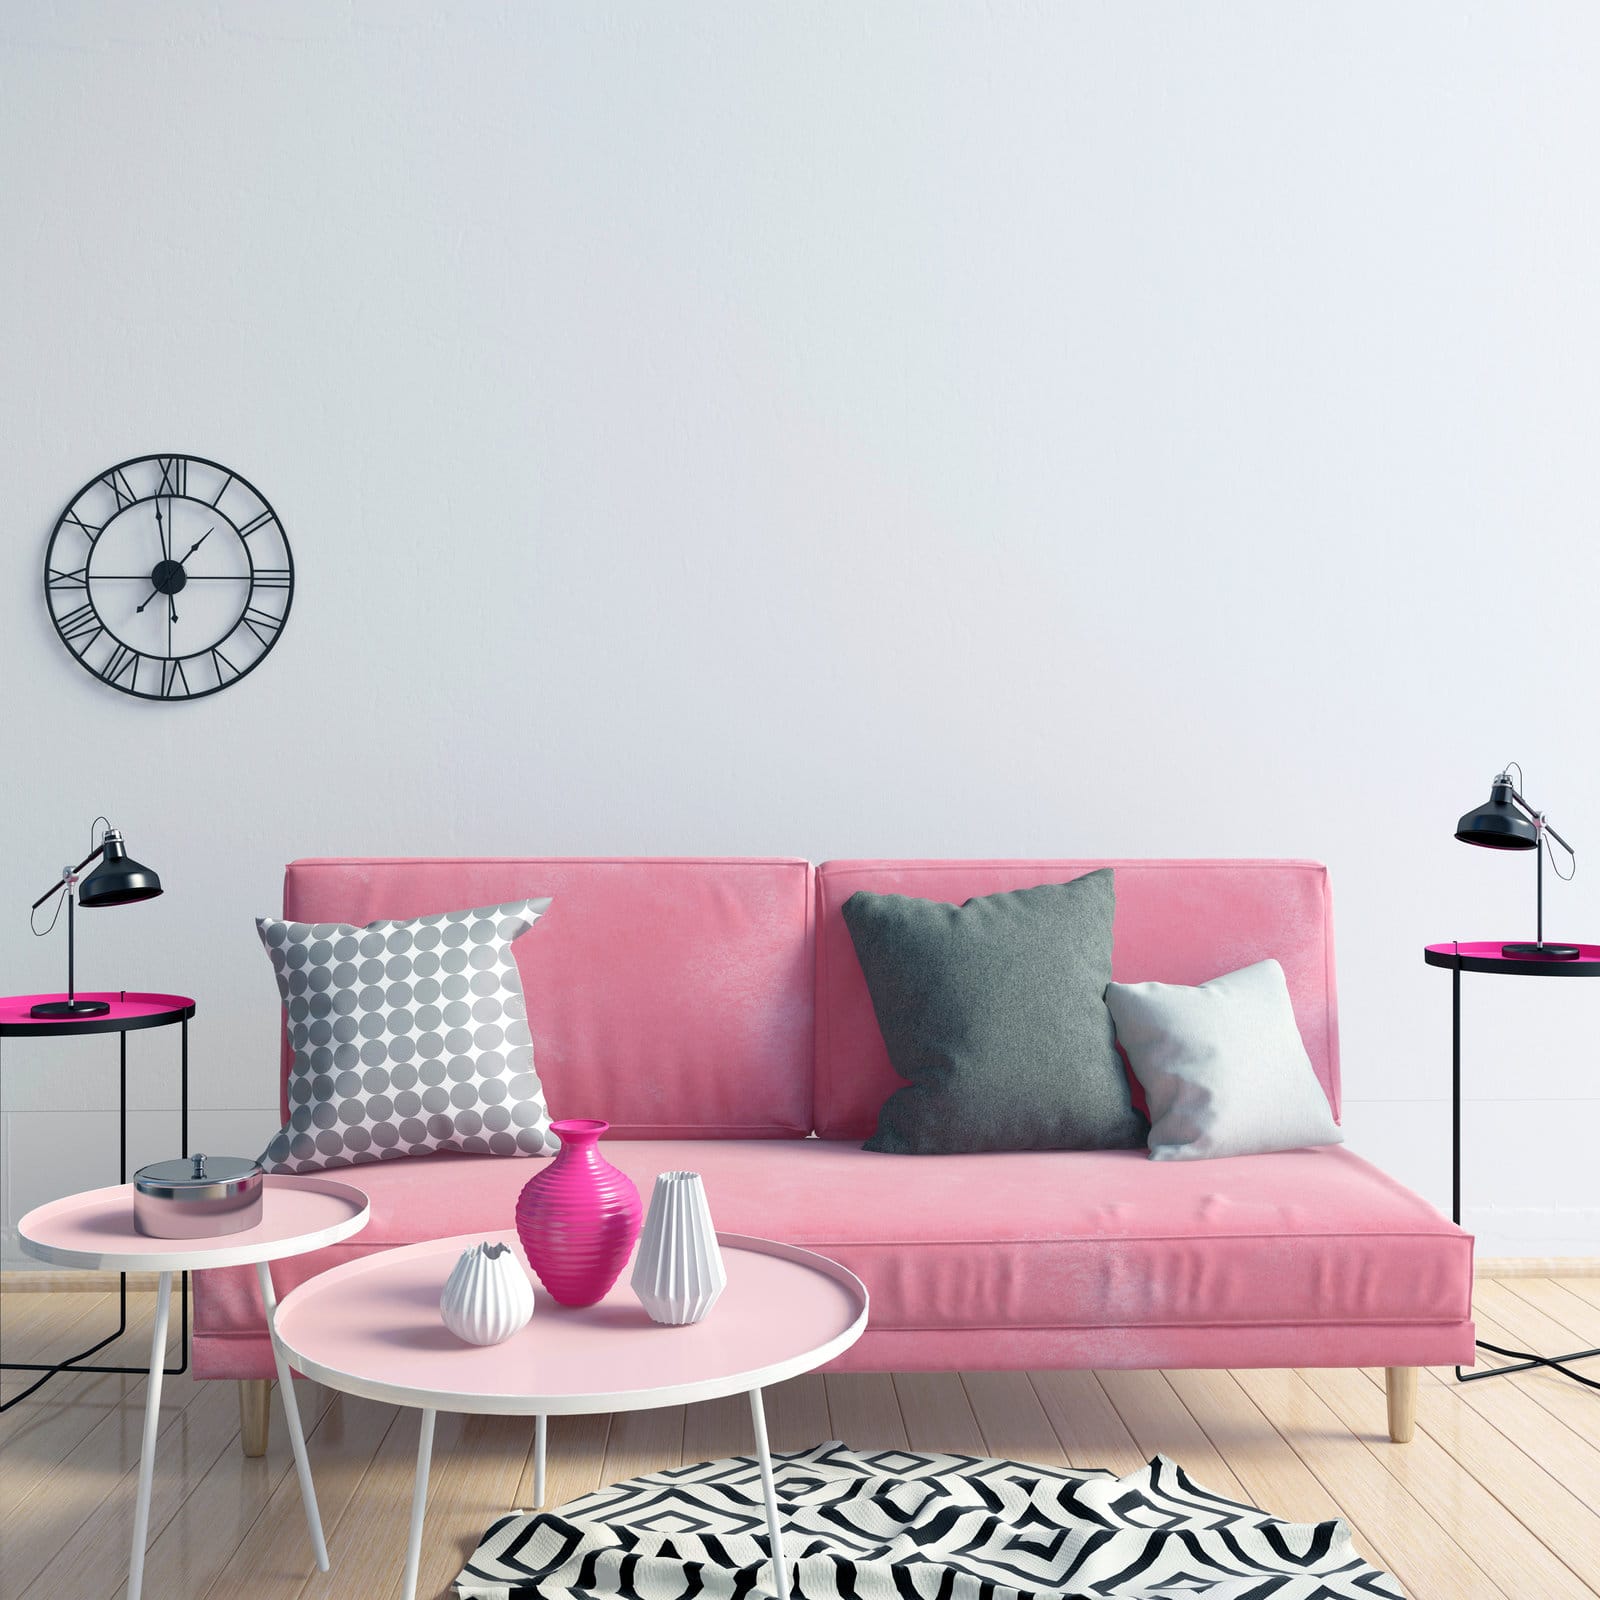  Pink Couches Make a Statement